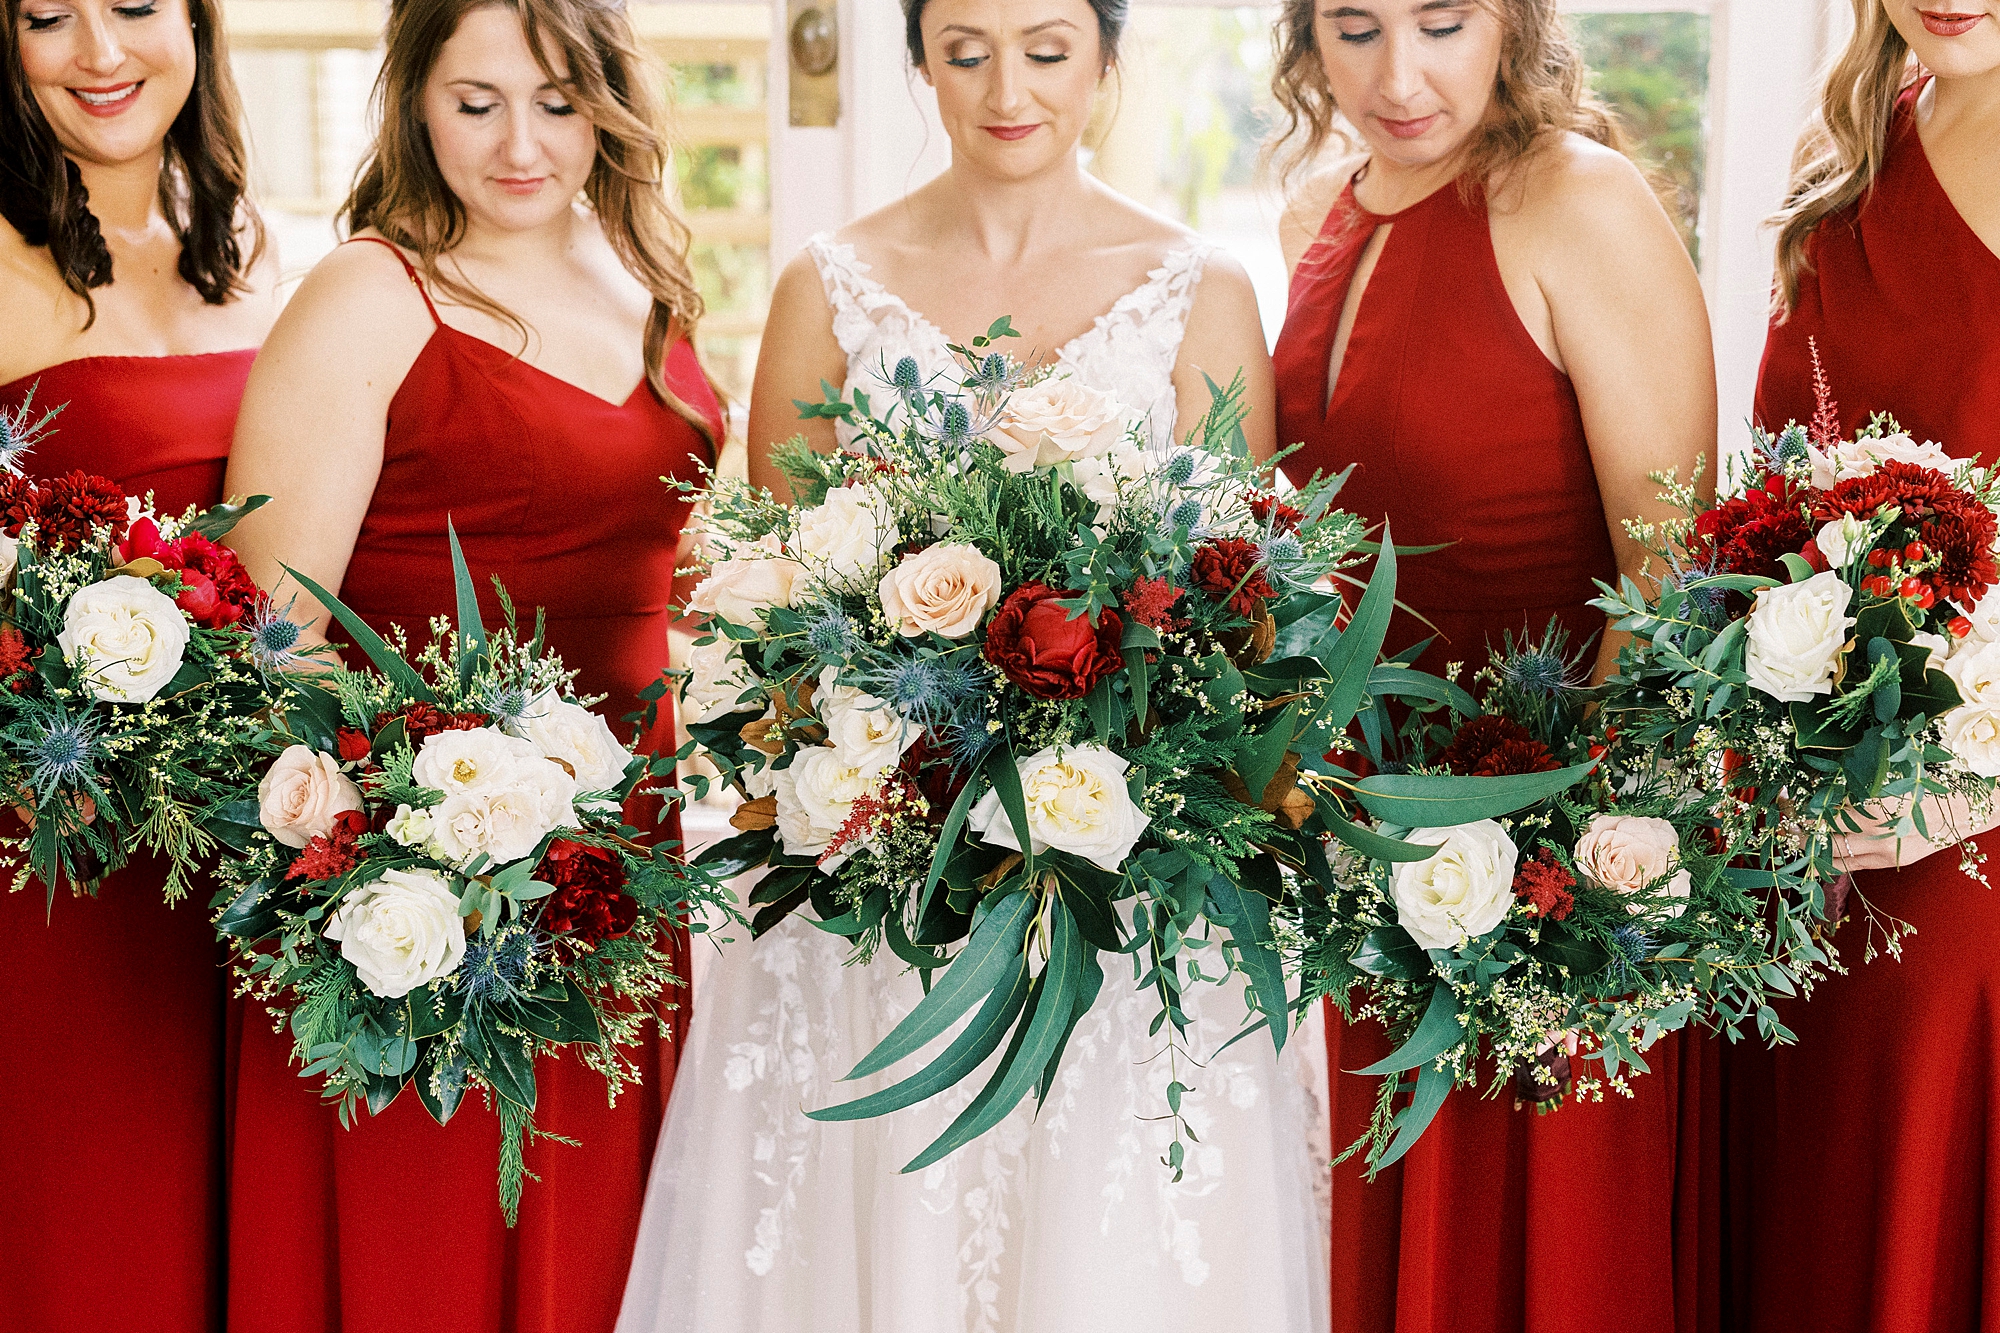 bride and bridesmaids in red gowns hold bouquets of white and red flowers for classic winter wedding at Separk Mansion